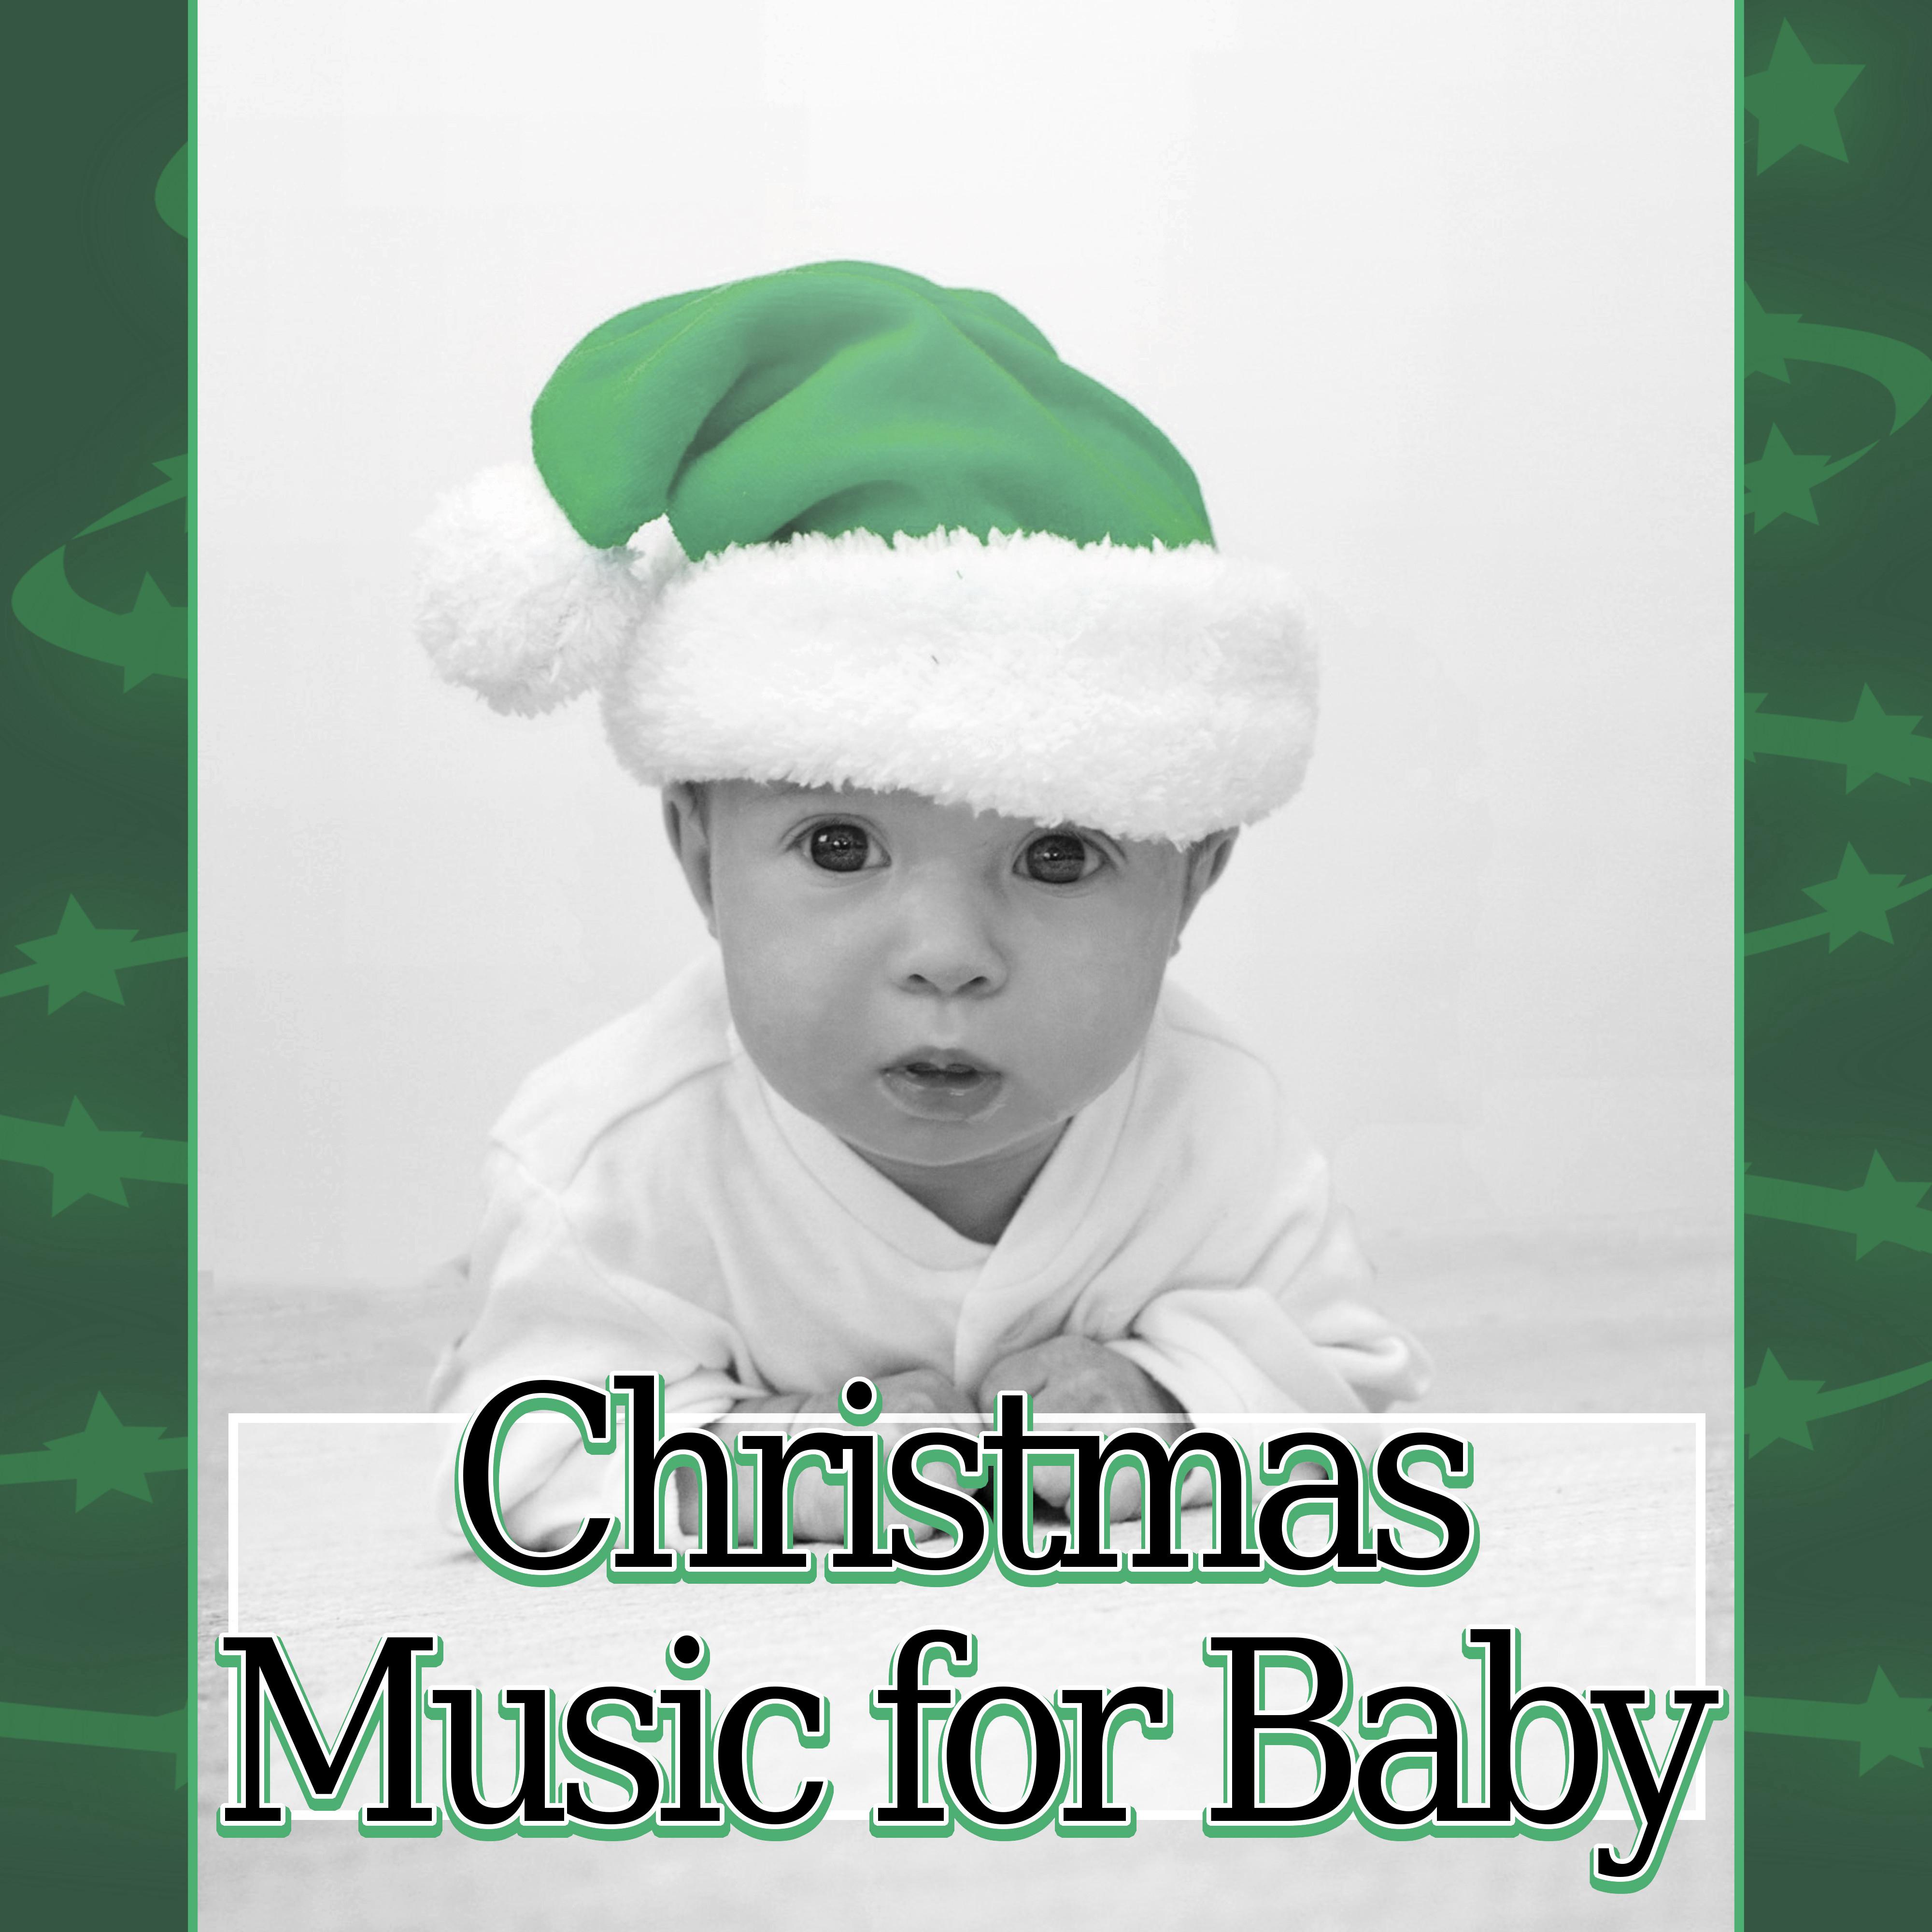 Christmas Music for Baby - Traditional Christmas Songs & Soothing Nature Sounds, Songs for Baby Sleep, Silent Night